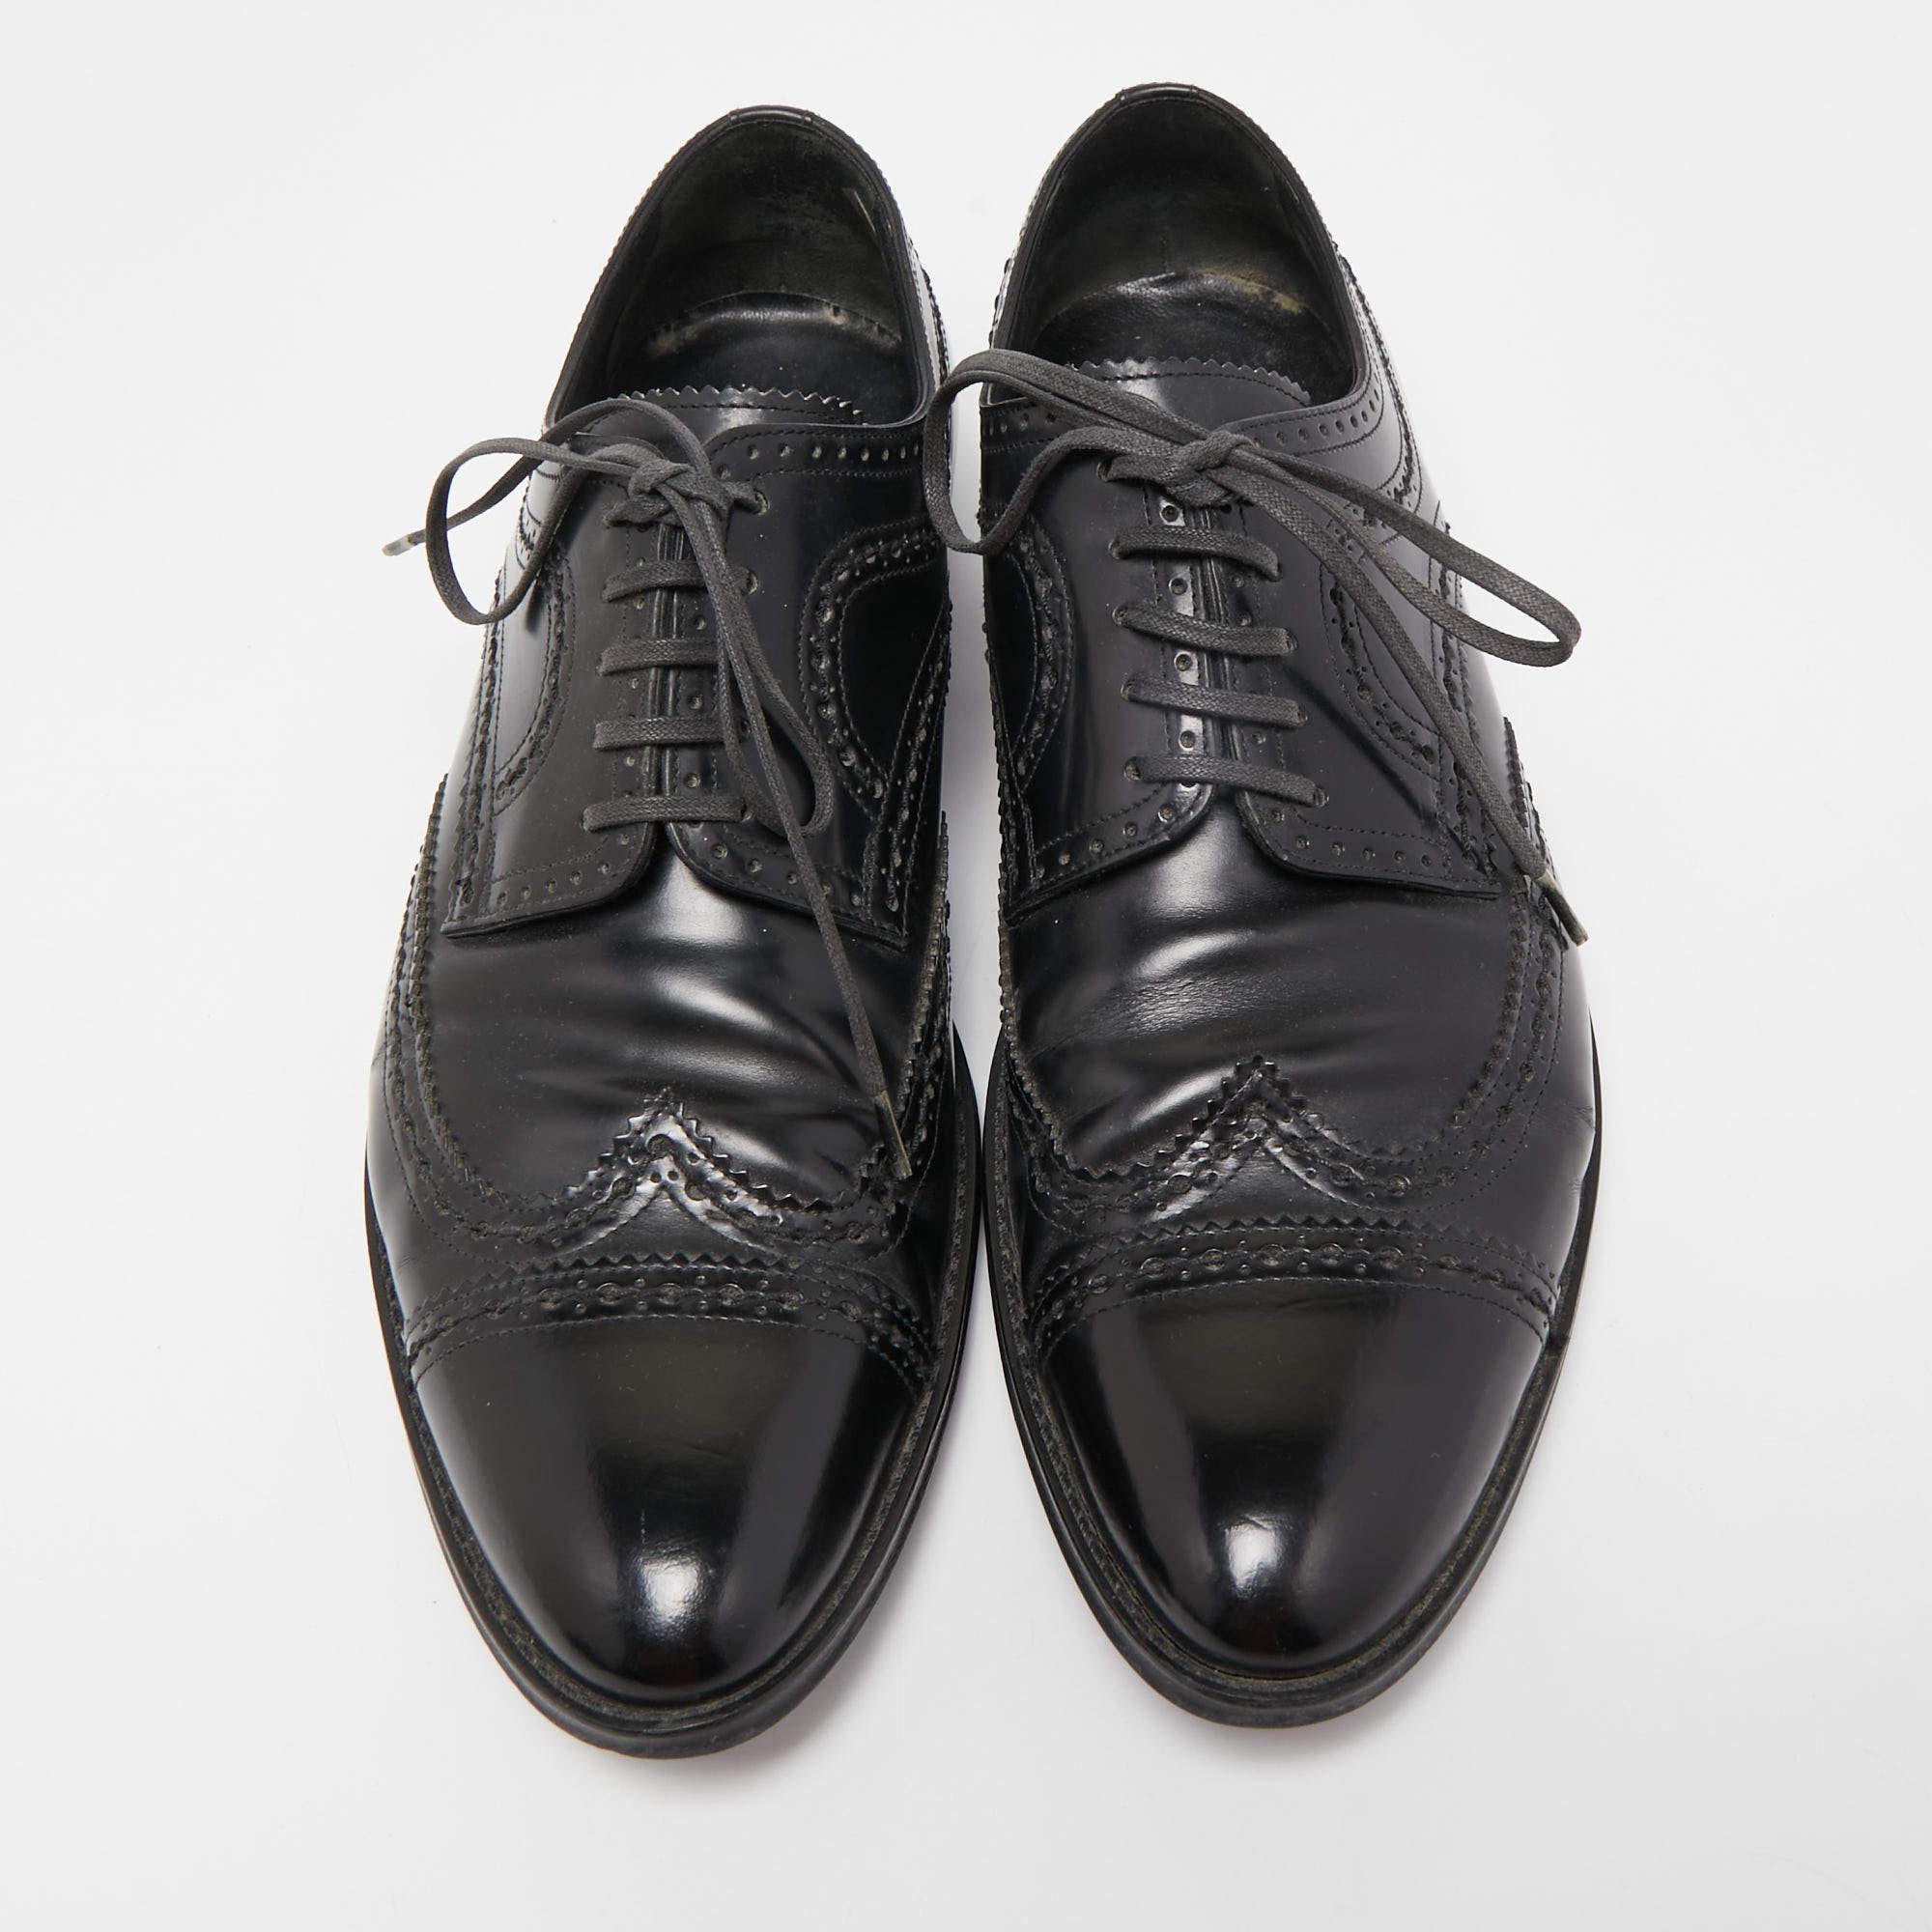 Take your shoe game a notch up with these designer derby shoes from Louis Vuitton. The black leather formal shoes for men are added with lace-up closure and low heels.

